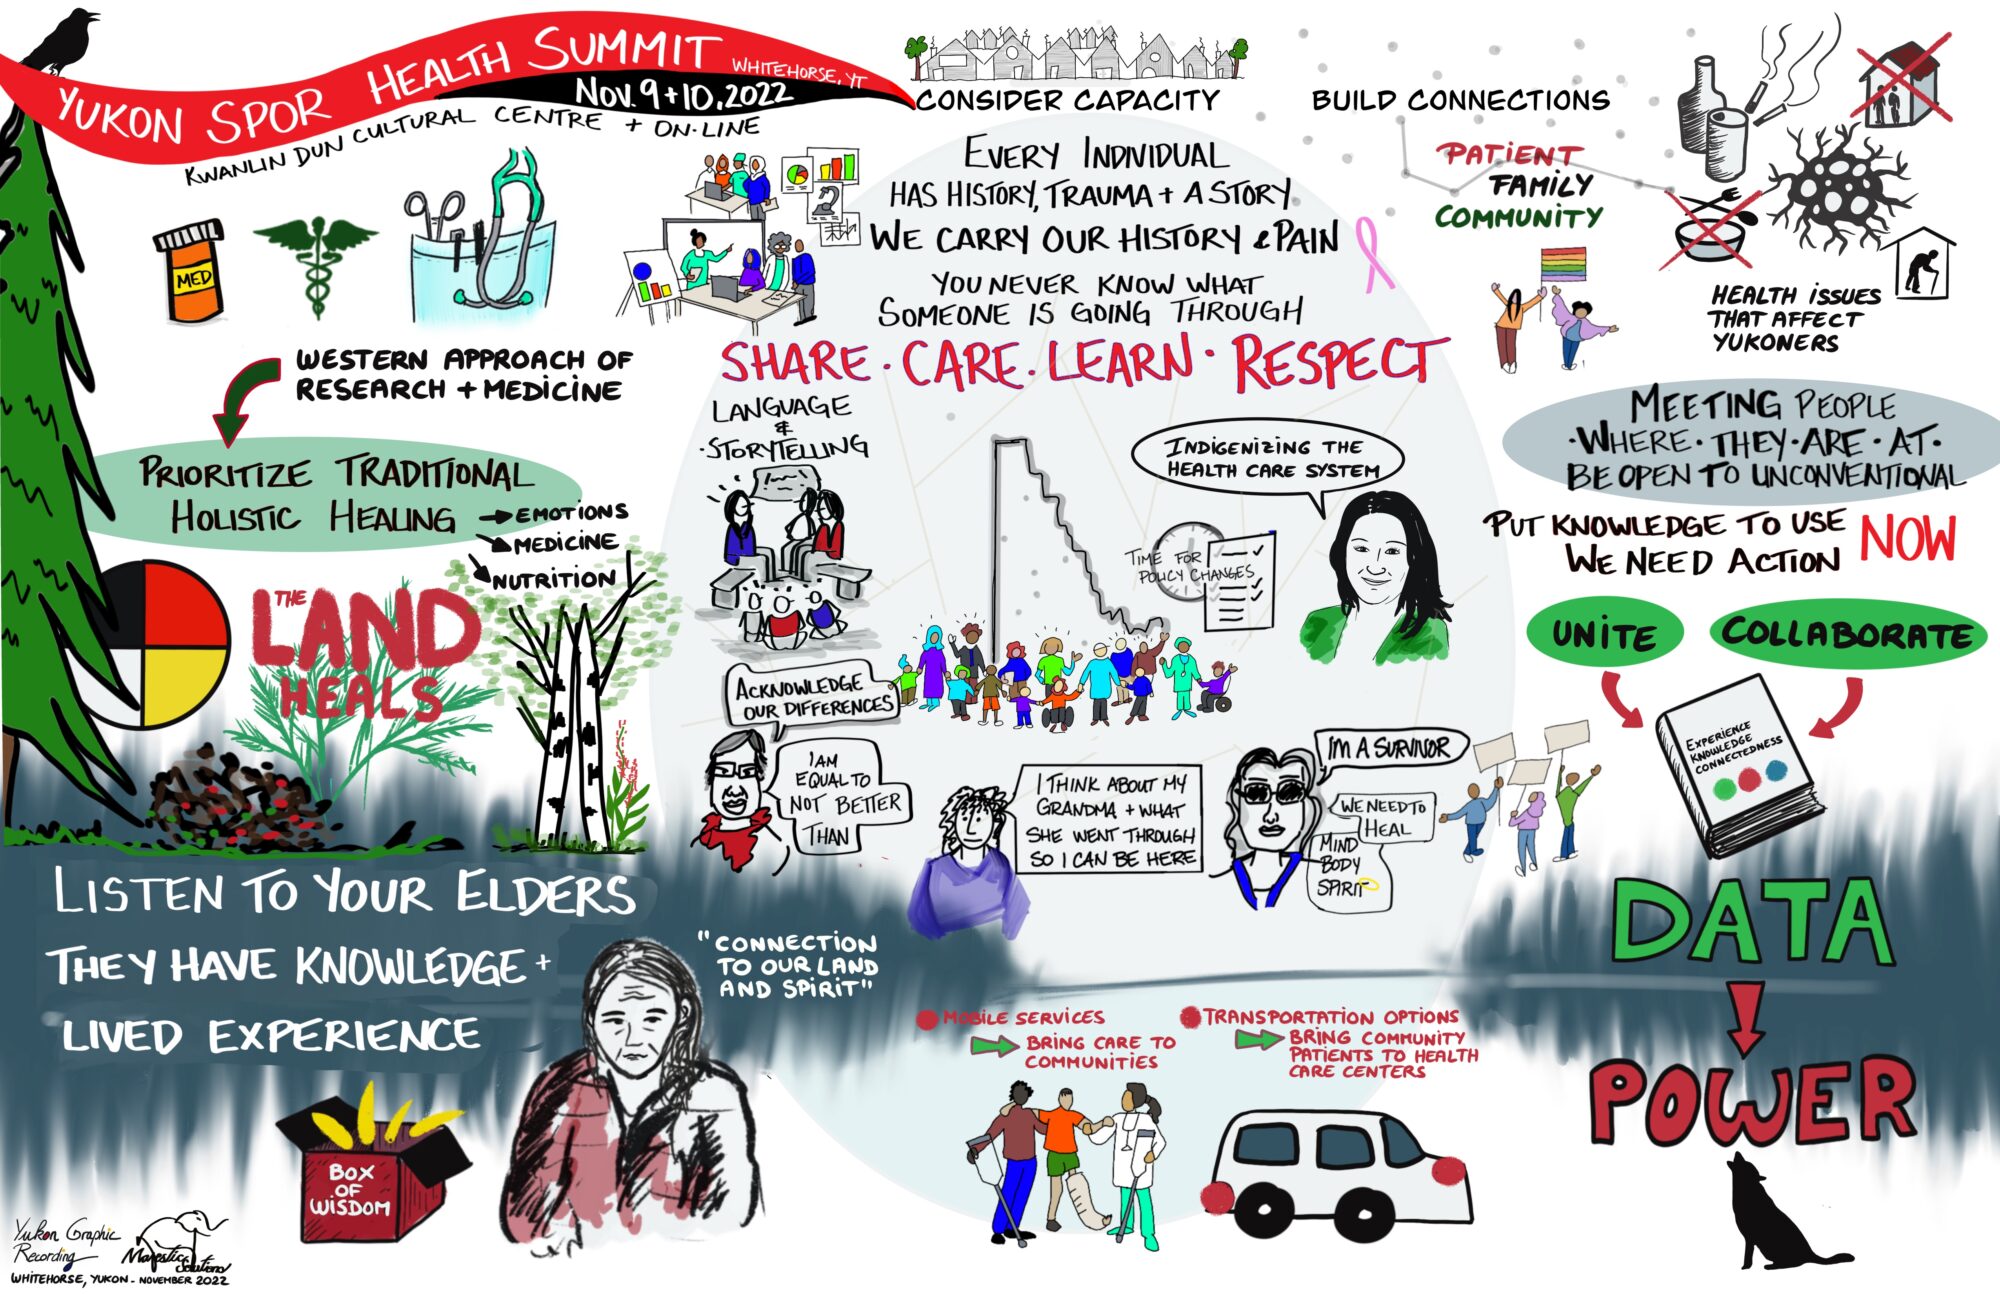 Final synthesis of all graphic notetaking from the 2022 YSPOR Health summit. Includes several sketches and written points that summarize the summit.